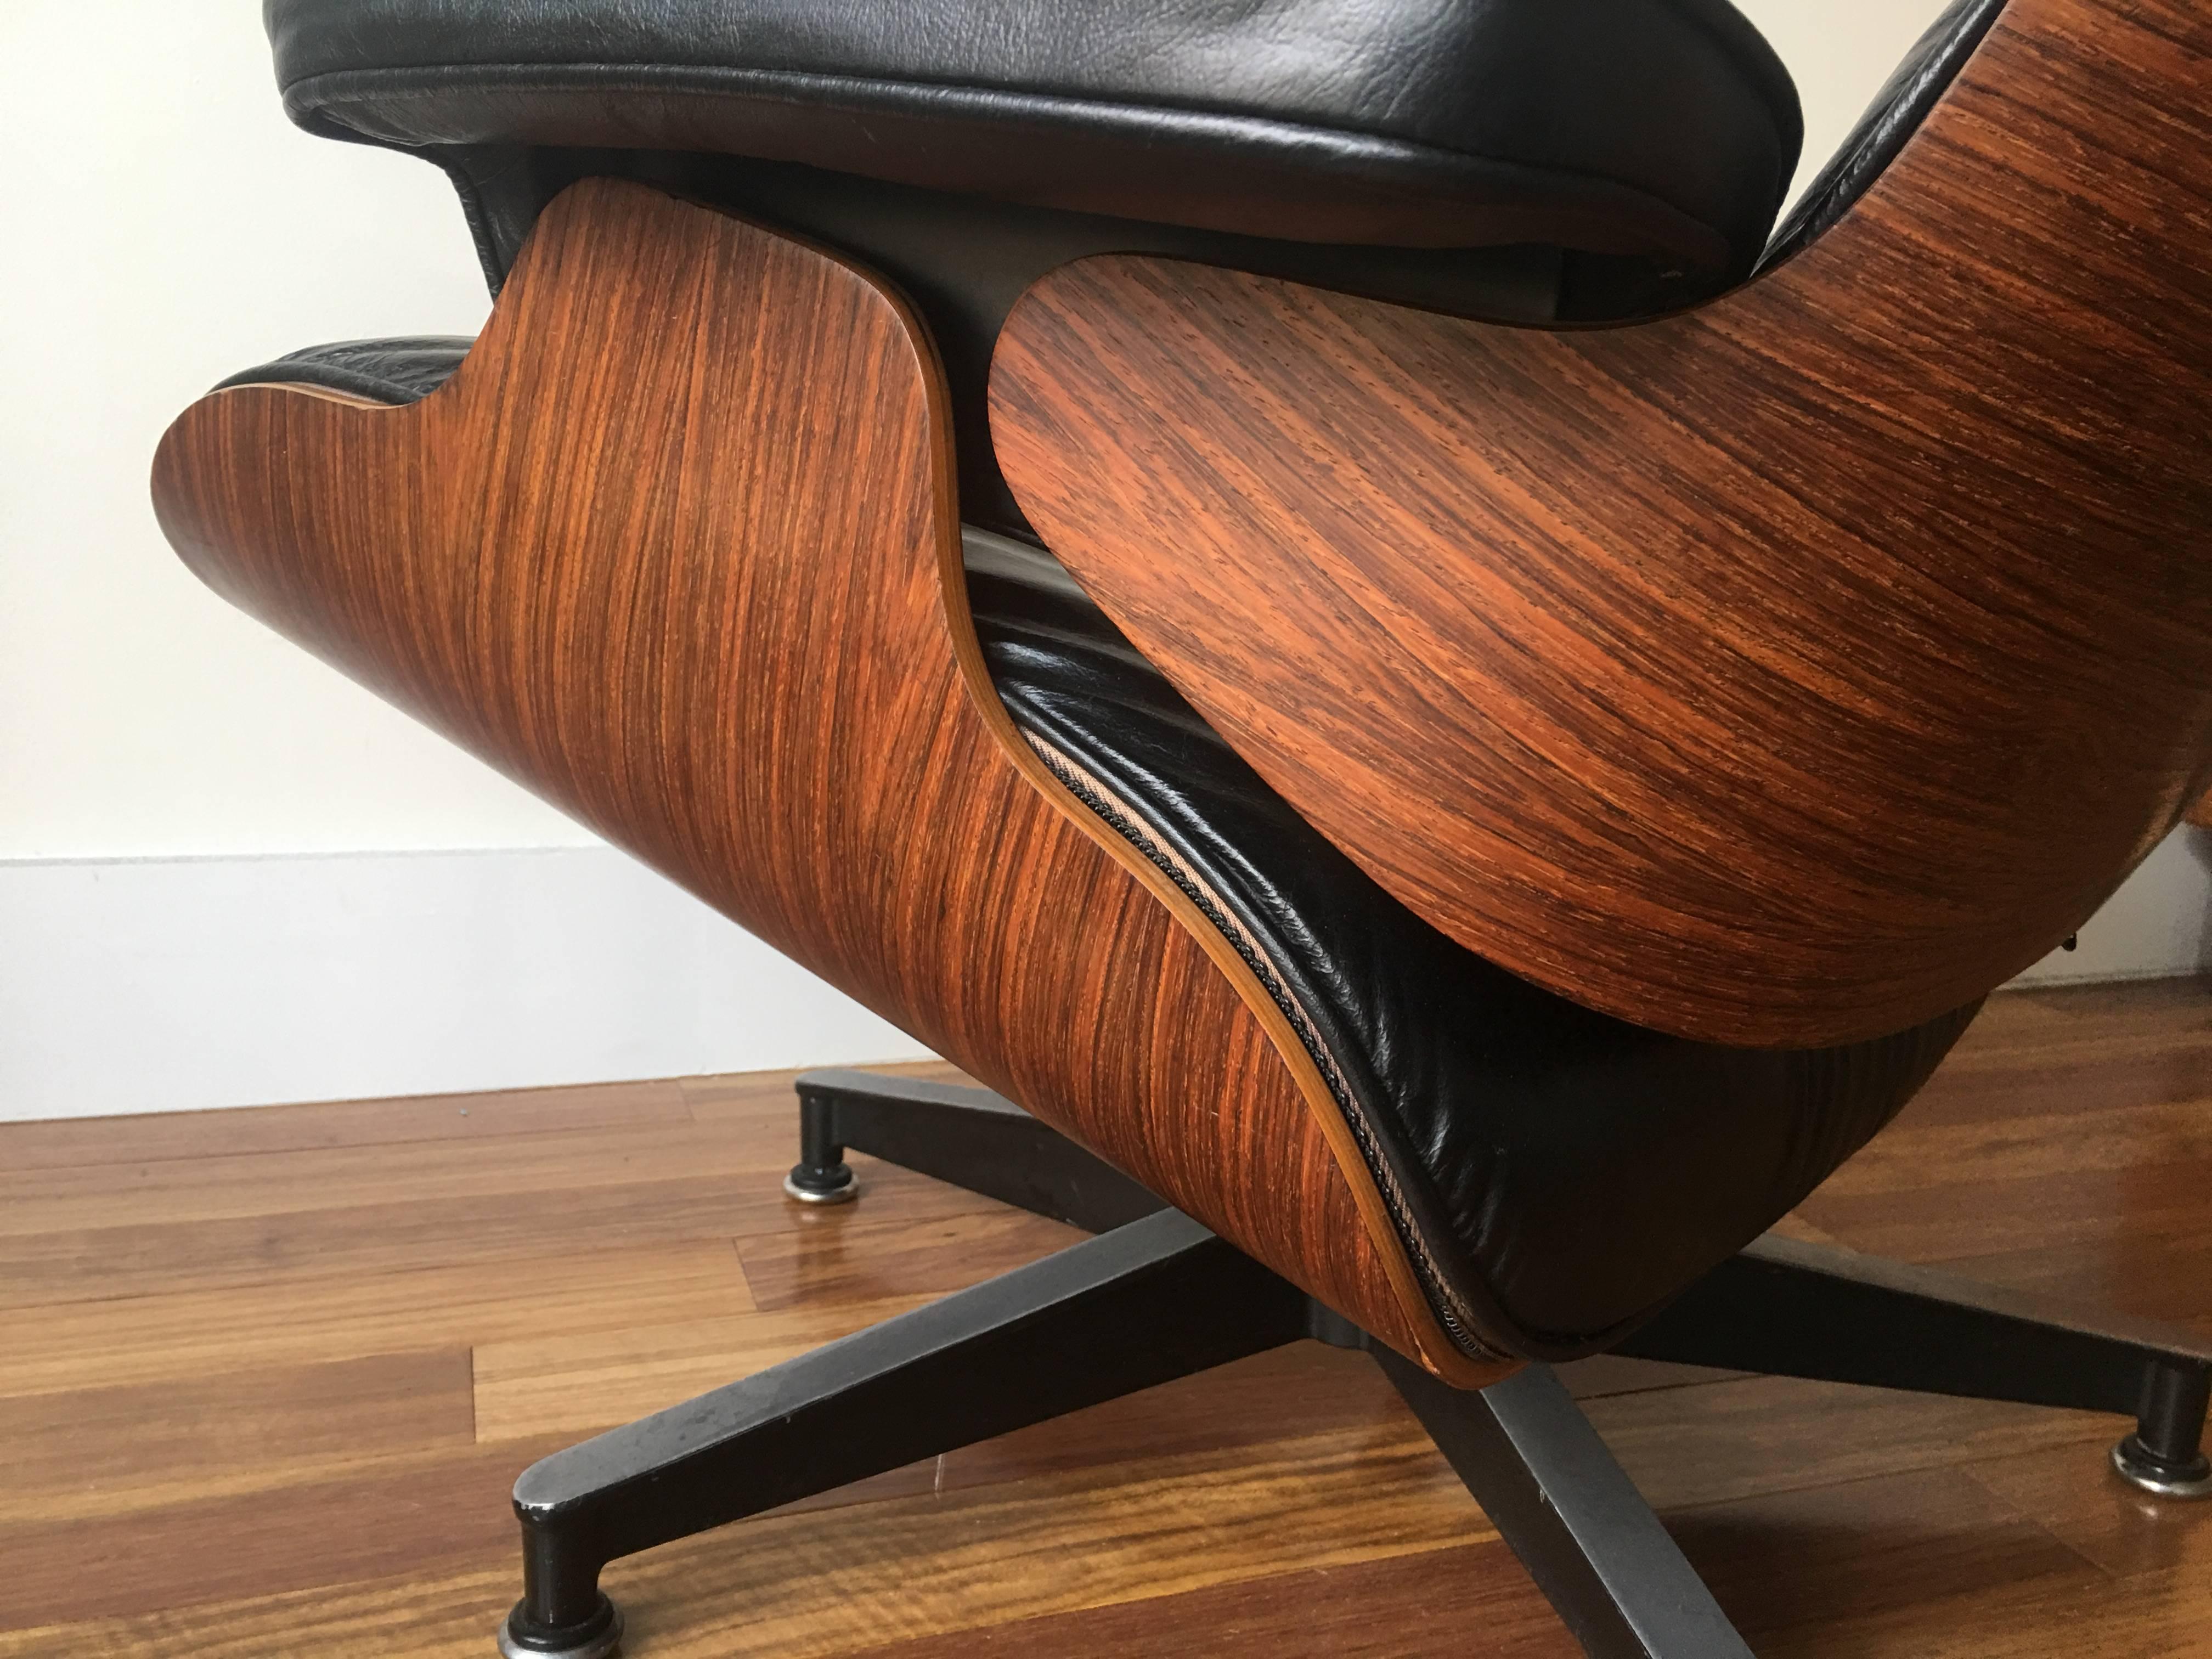 Original Herman Miller Eames rosewood lounge chair and ottoman from 1980s. In original condition with near perfect rosewood. Typical wear to cushions. No rips or holes. Shock mounts have been professionally redone by Hume Modern.